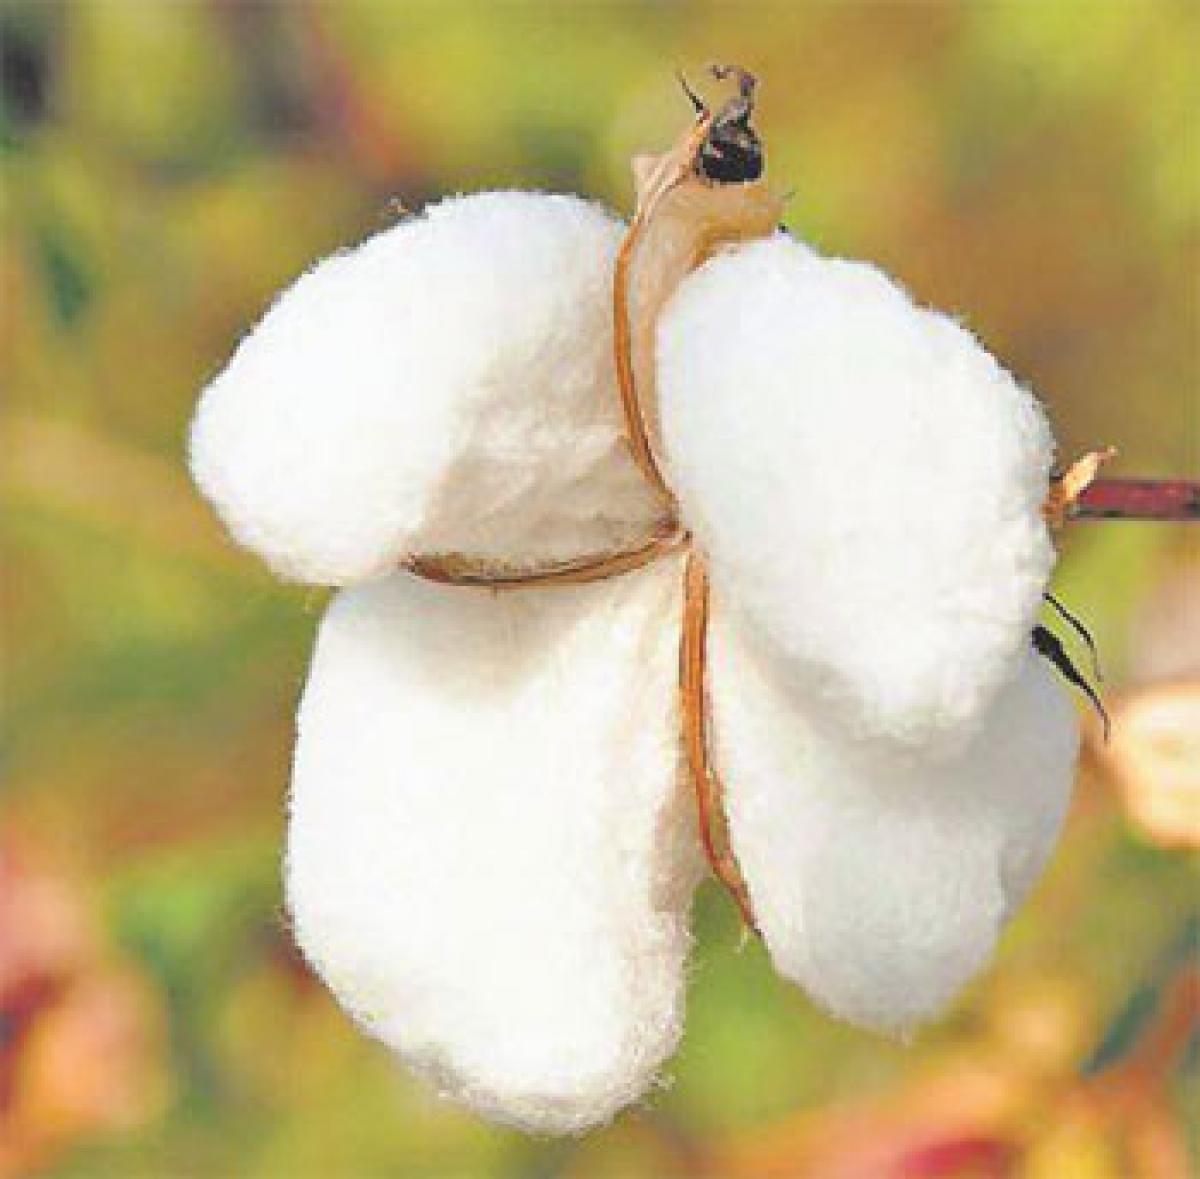 Cotton output may dip 11%: Report